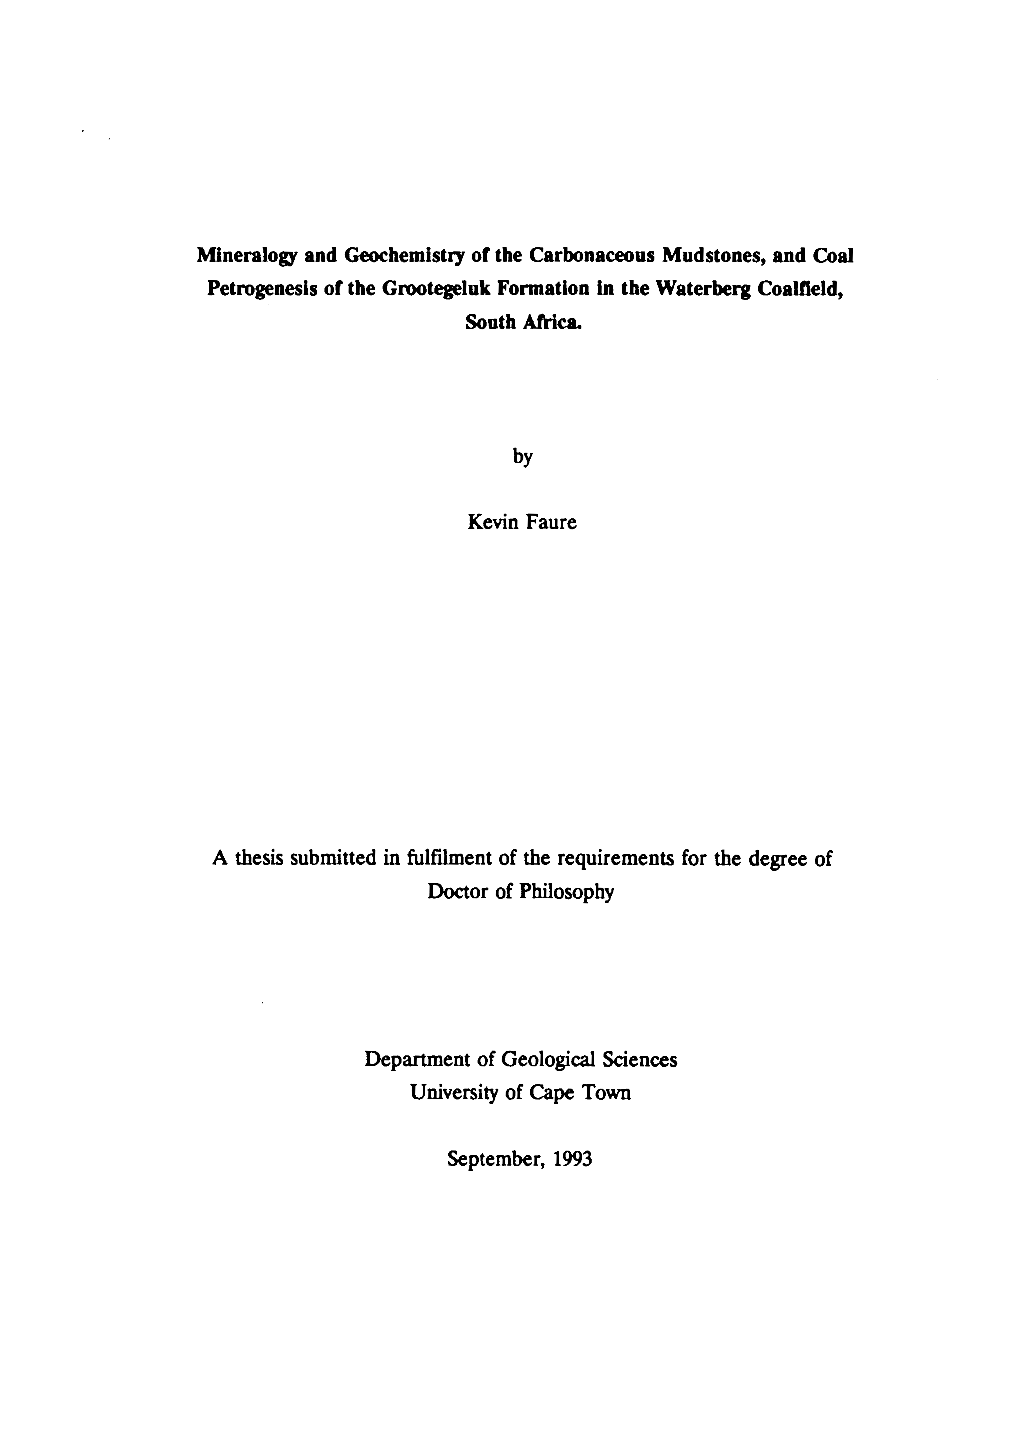 Thesis Sci 1993 Faure Kevin.Pdf